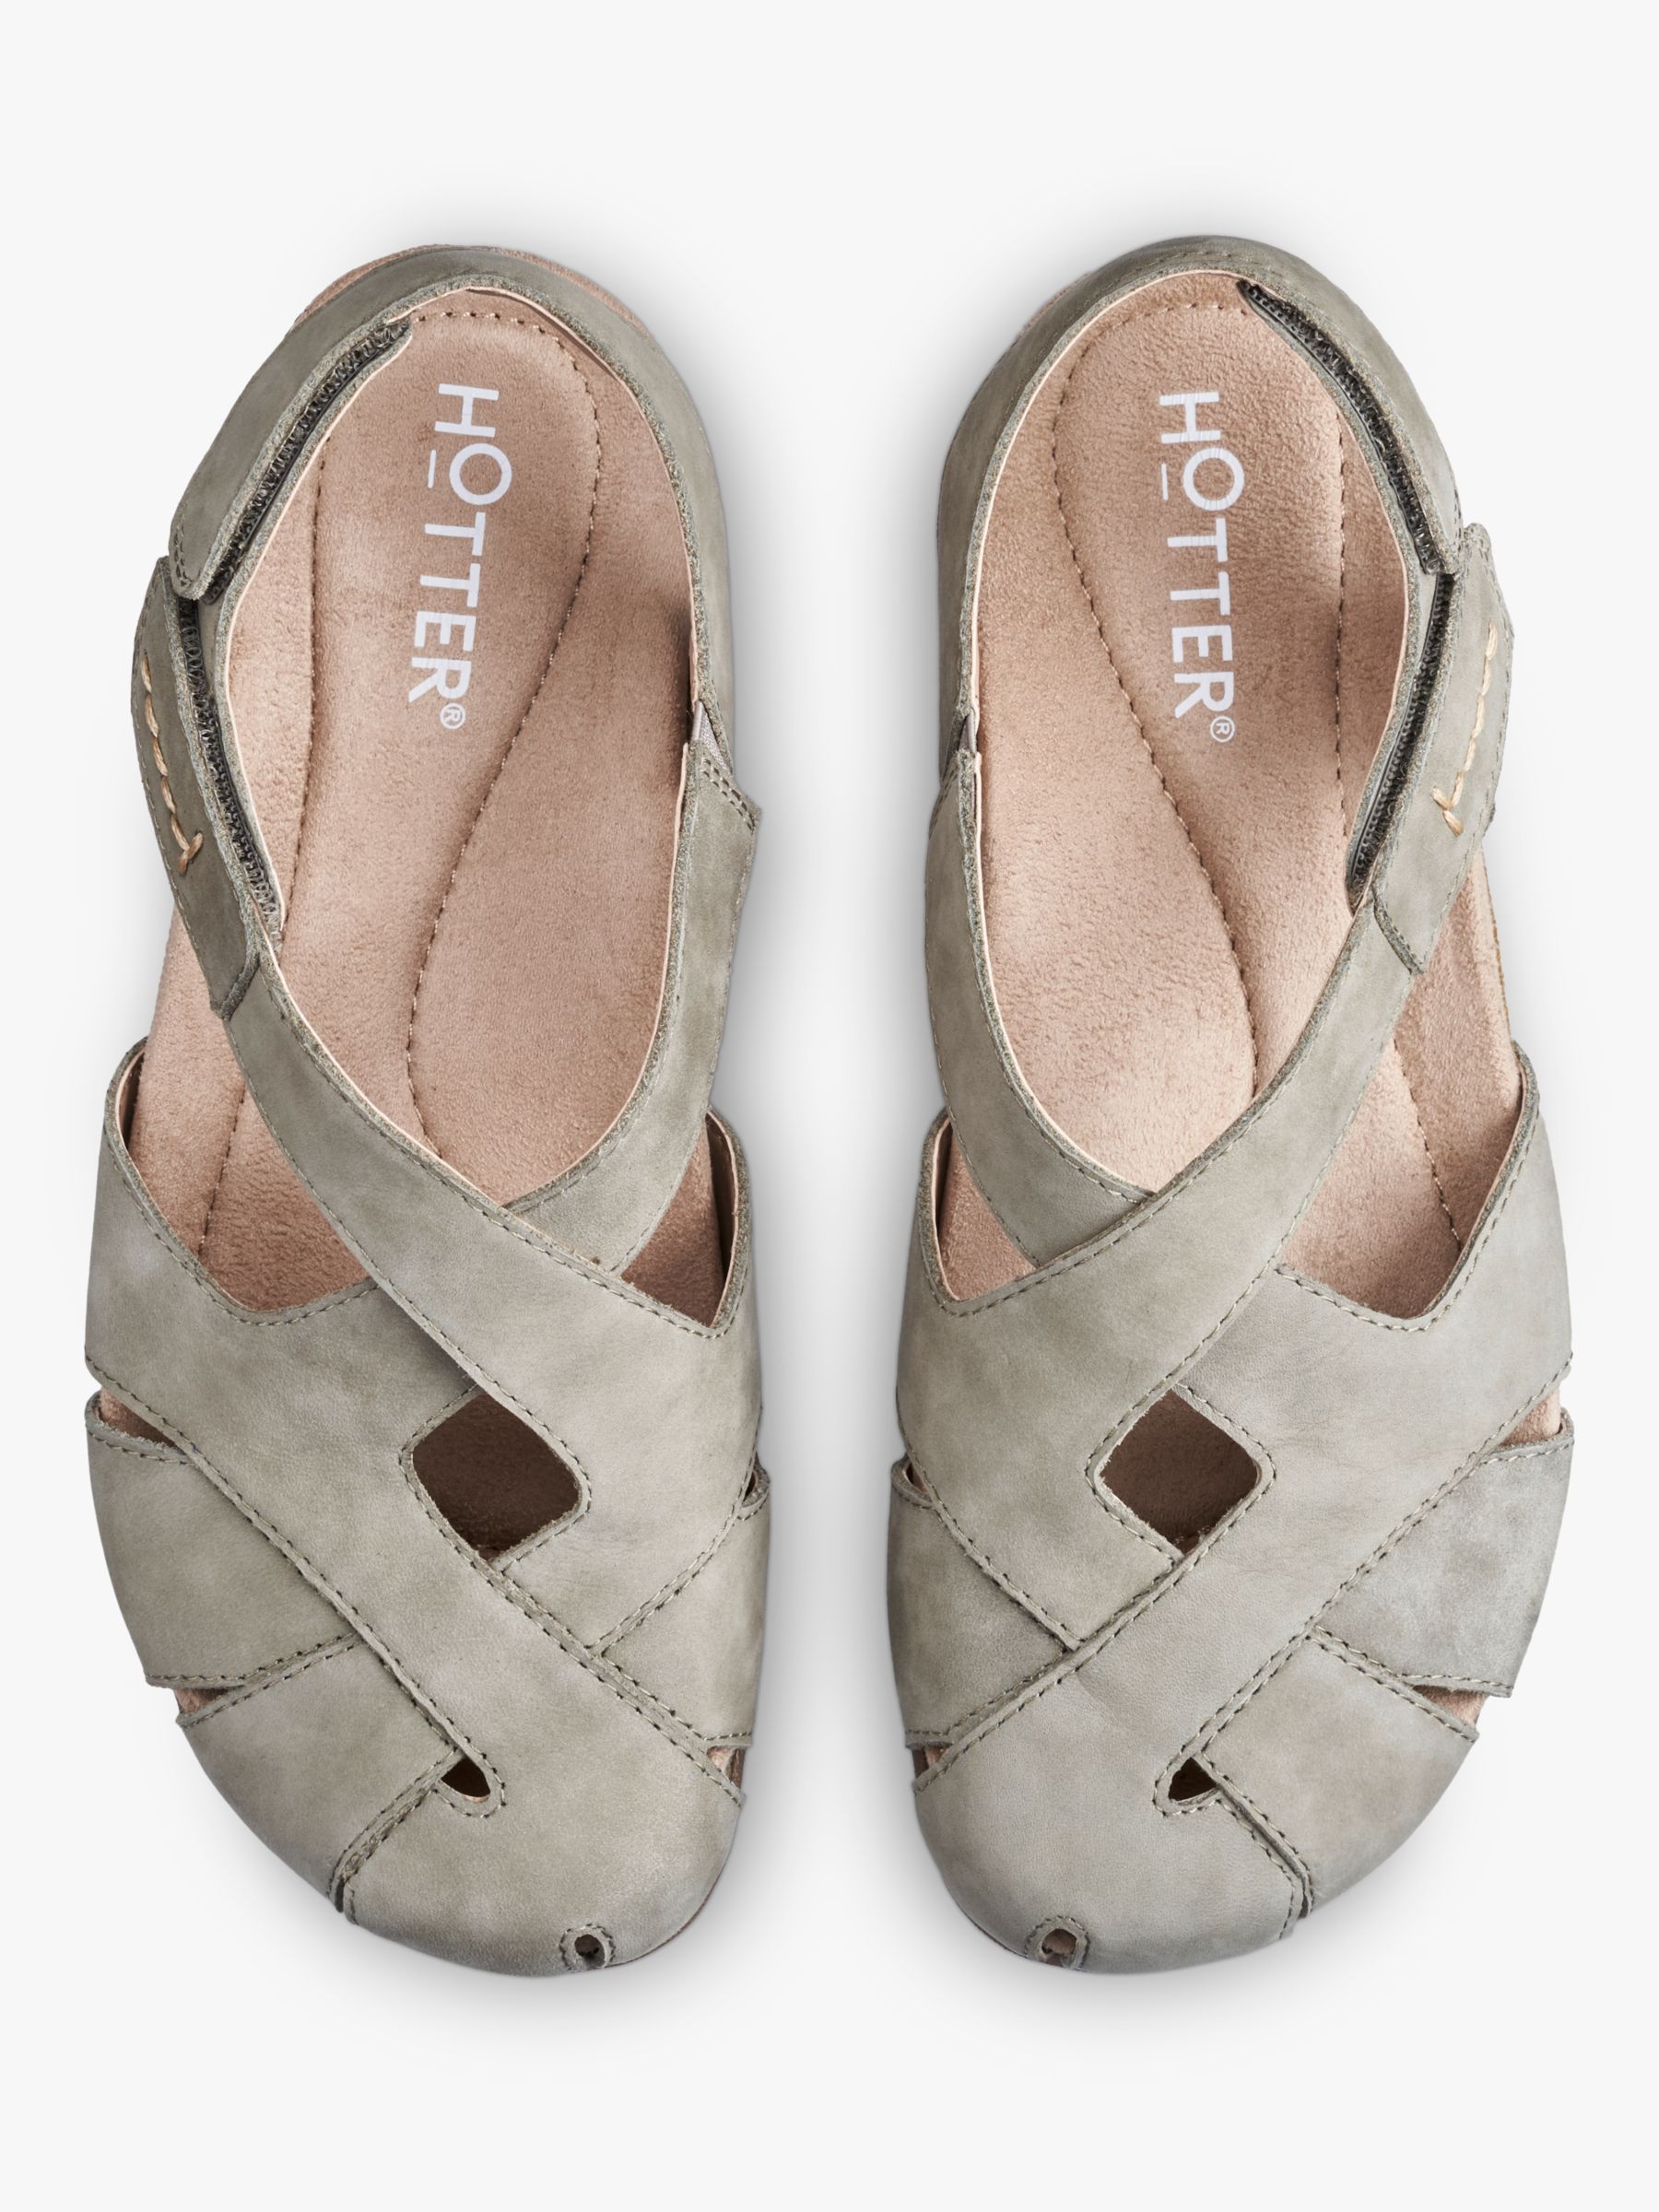 Buy Hotter Catskill II Wide Fit Closed Toe Sandals Online at johnlewis.com